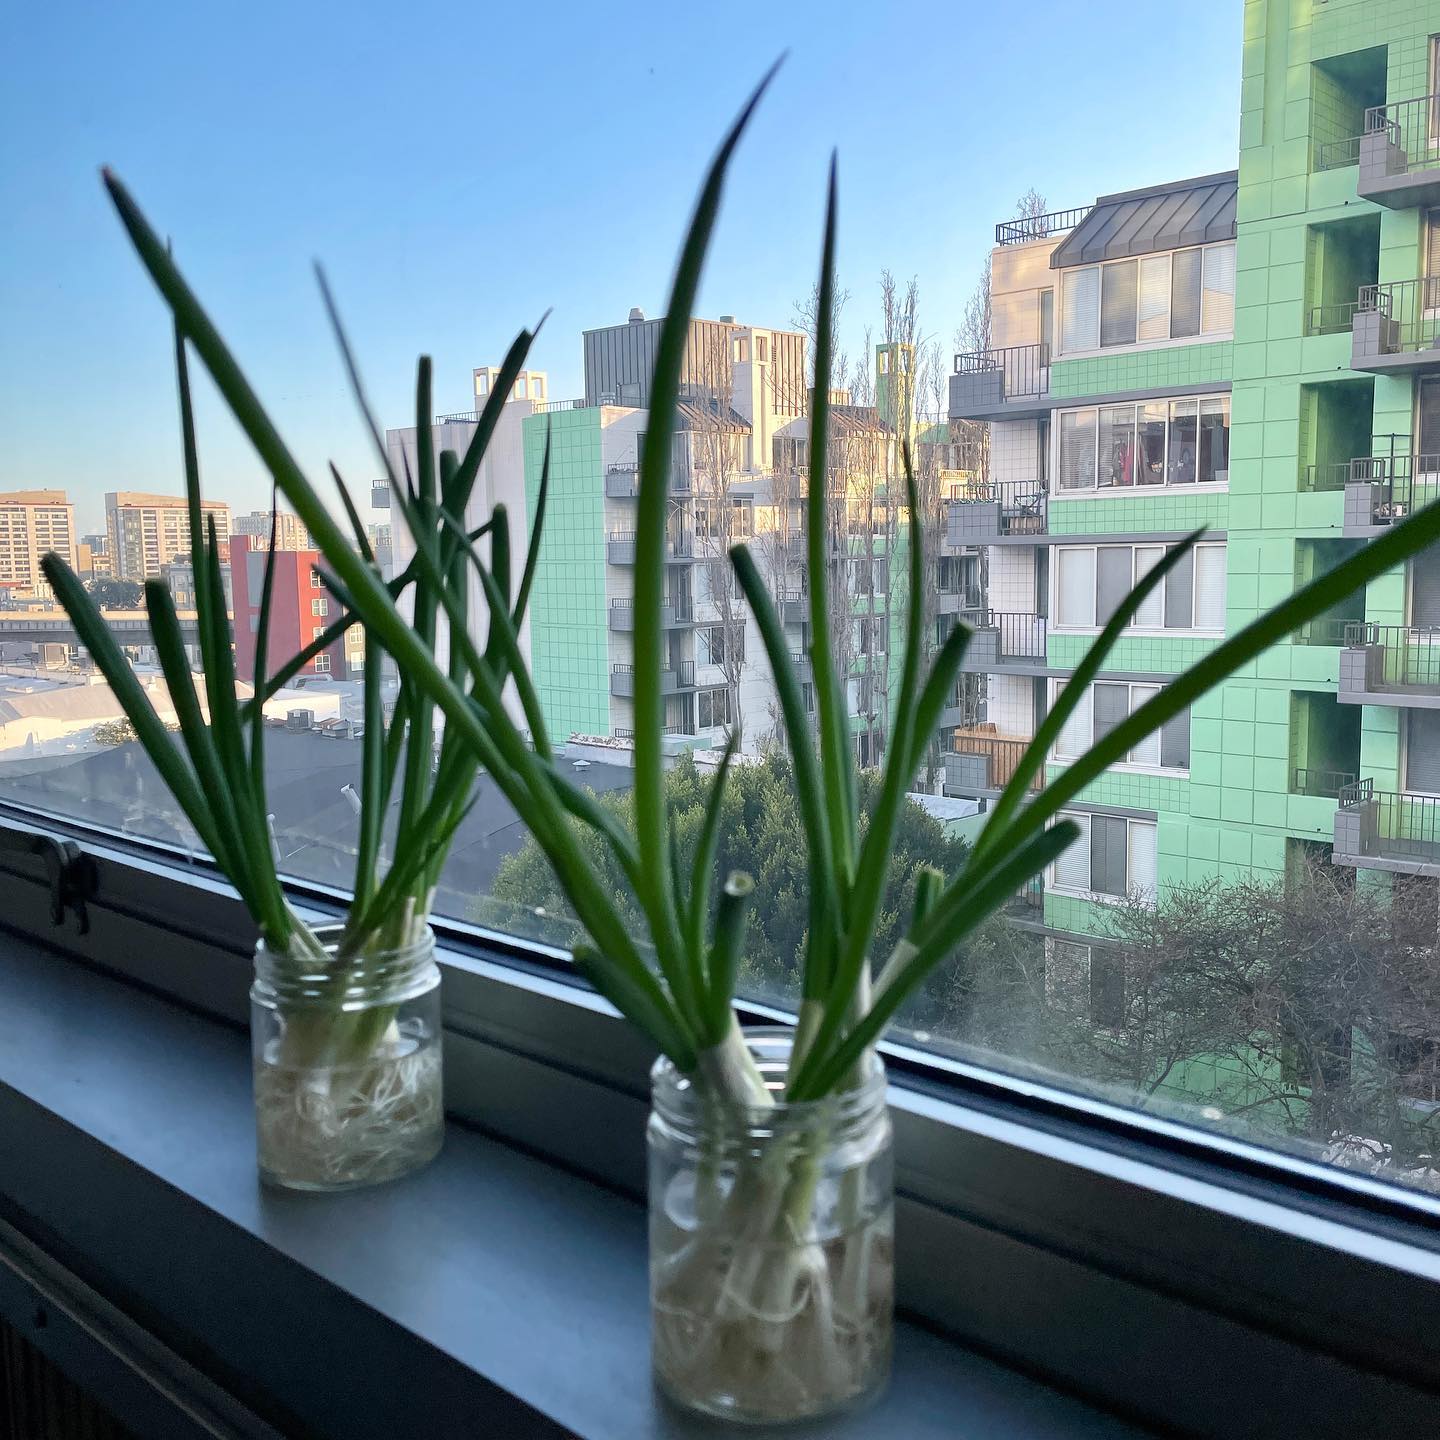 Simple urban garden with @maxkiesler’s green onions. We just harvested last week’s growth and made green onion pancakes. 😀